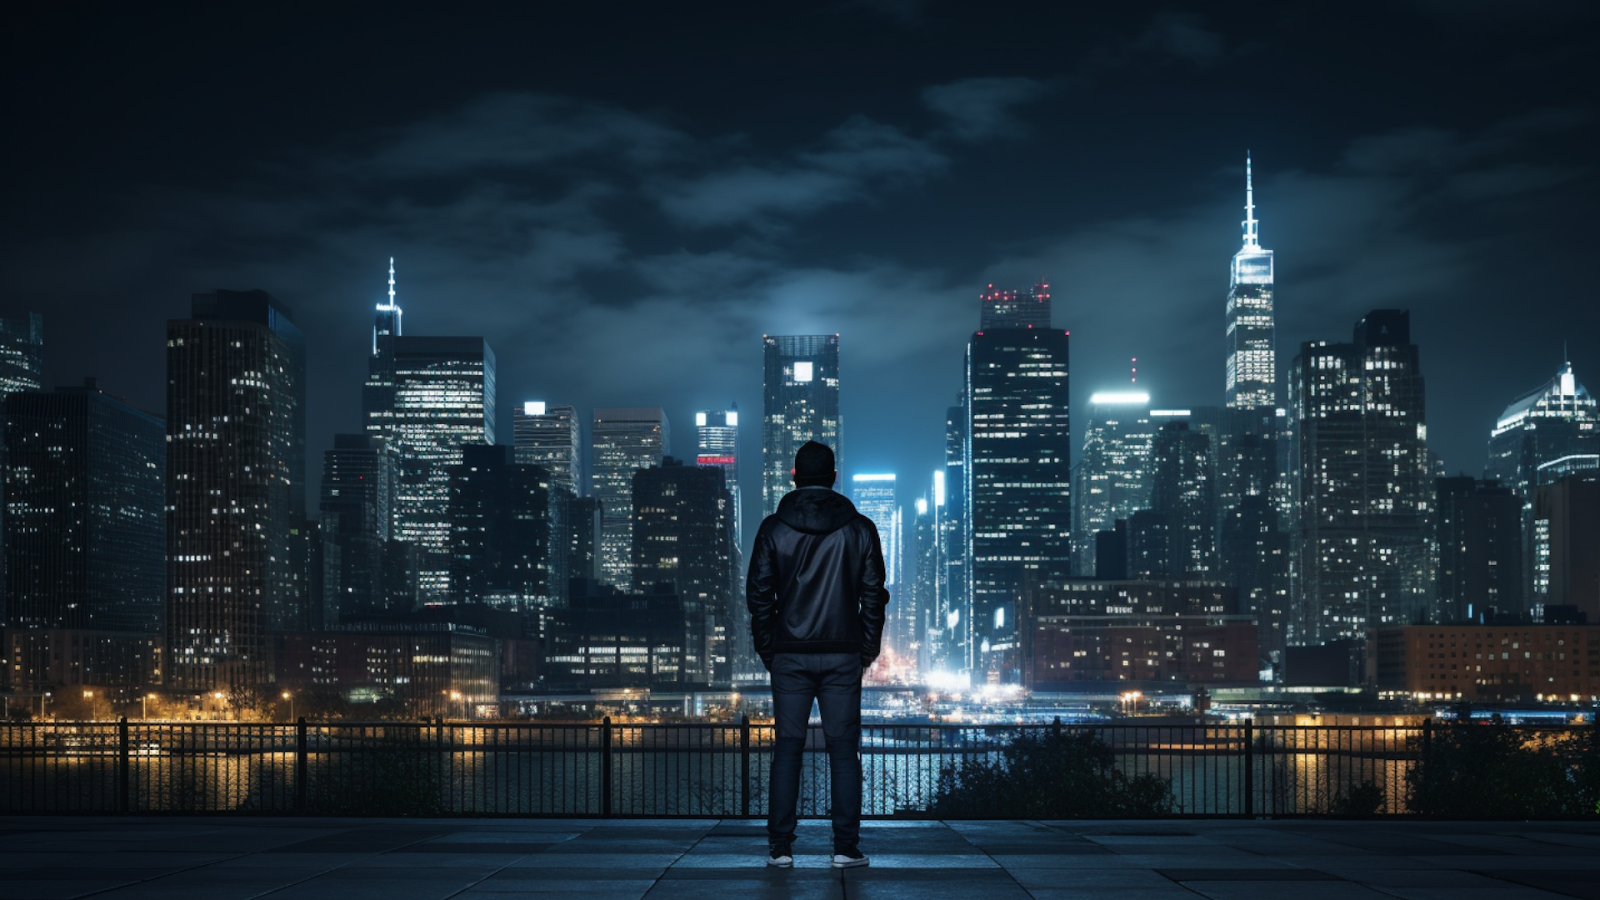 A solo traveler stands before the city lights of Manhattan, marveling at the architectural design of the skyline, emphasized by the city's night lights.